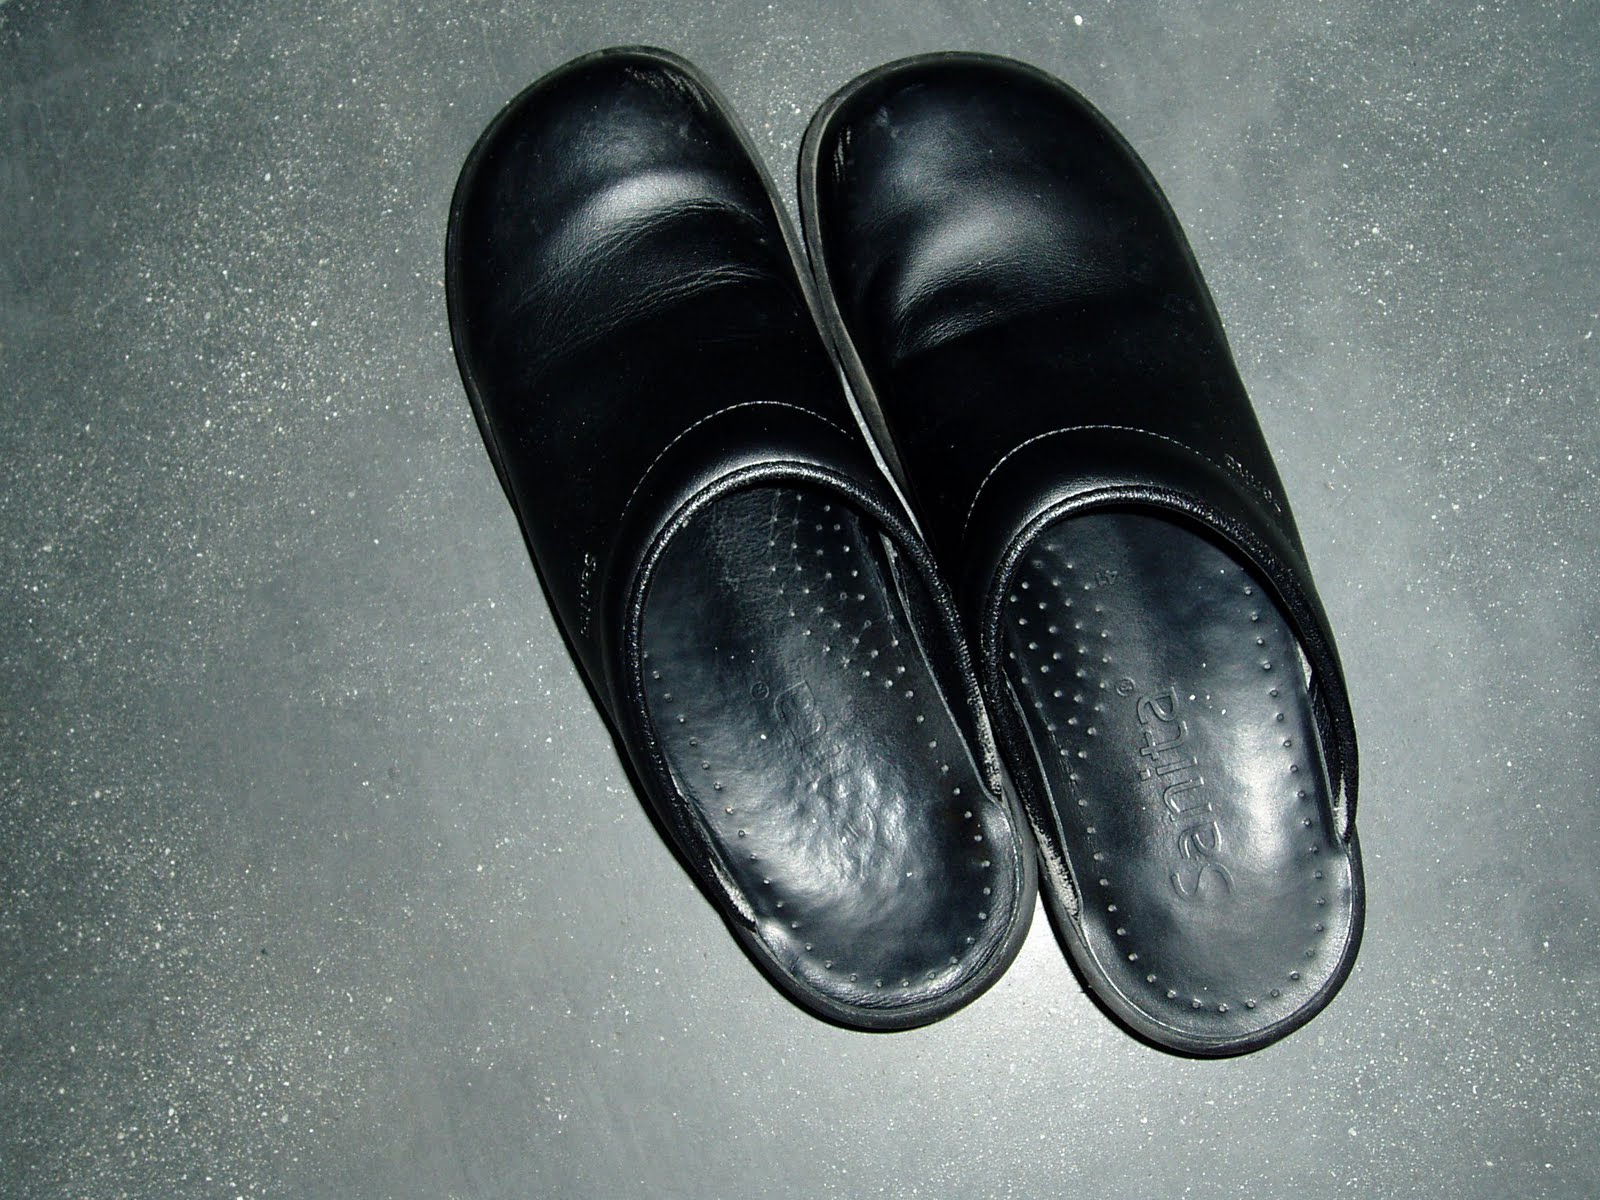 These are my trusty Sanita clogs, the second pair of clogs I've owned: